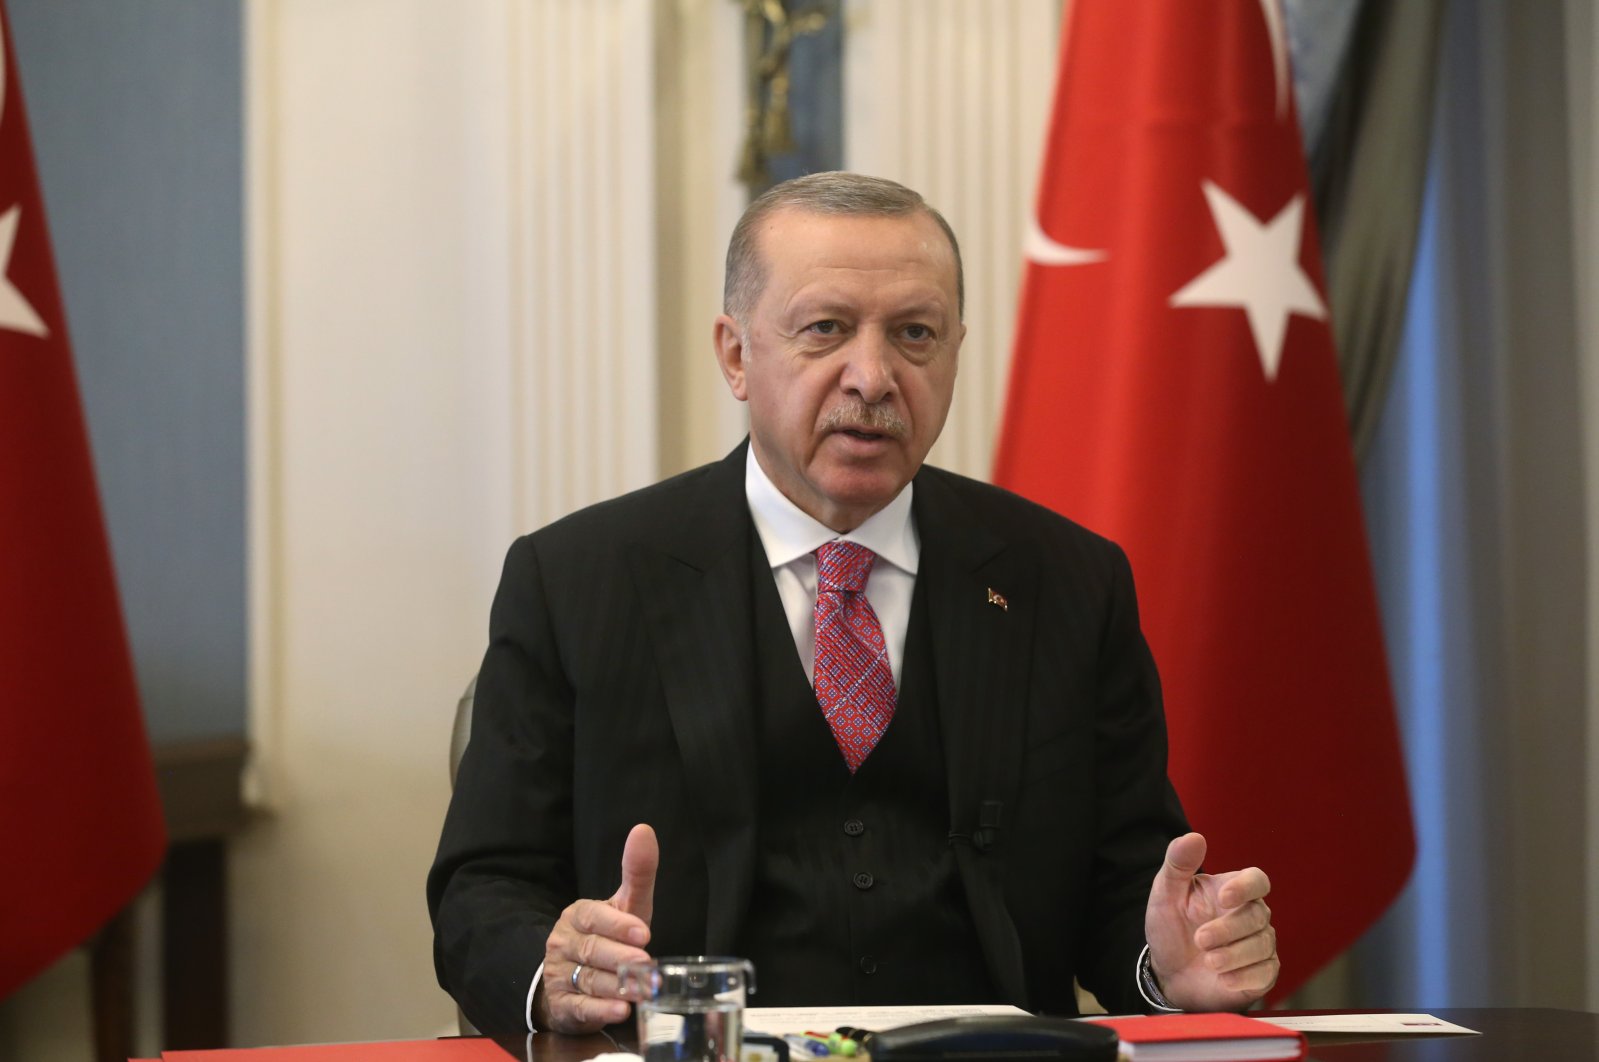 President Recep Tayyip Erdoğan addresses members of the ruling Justice and Development Party (AK Party) via videoconference, July 1, 2020. (AA Photo)